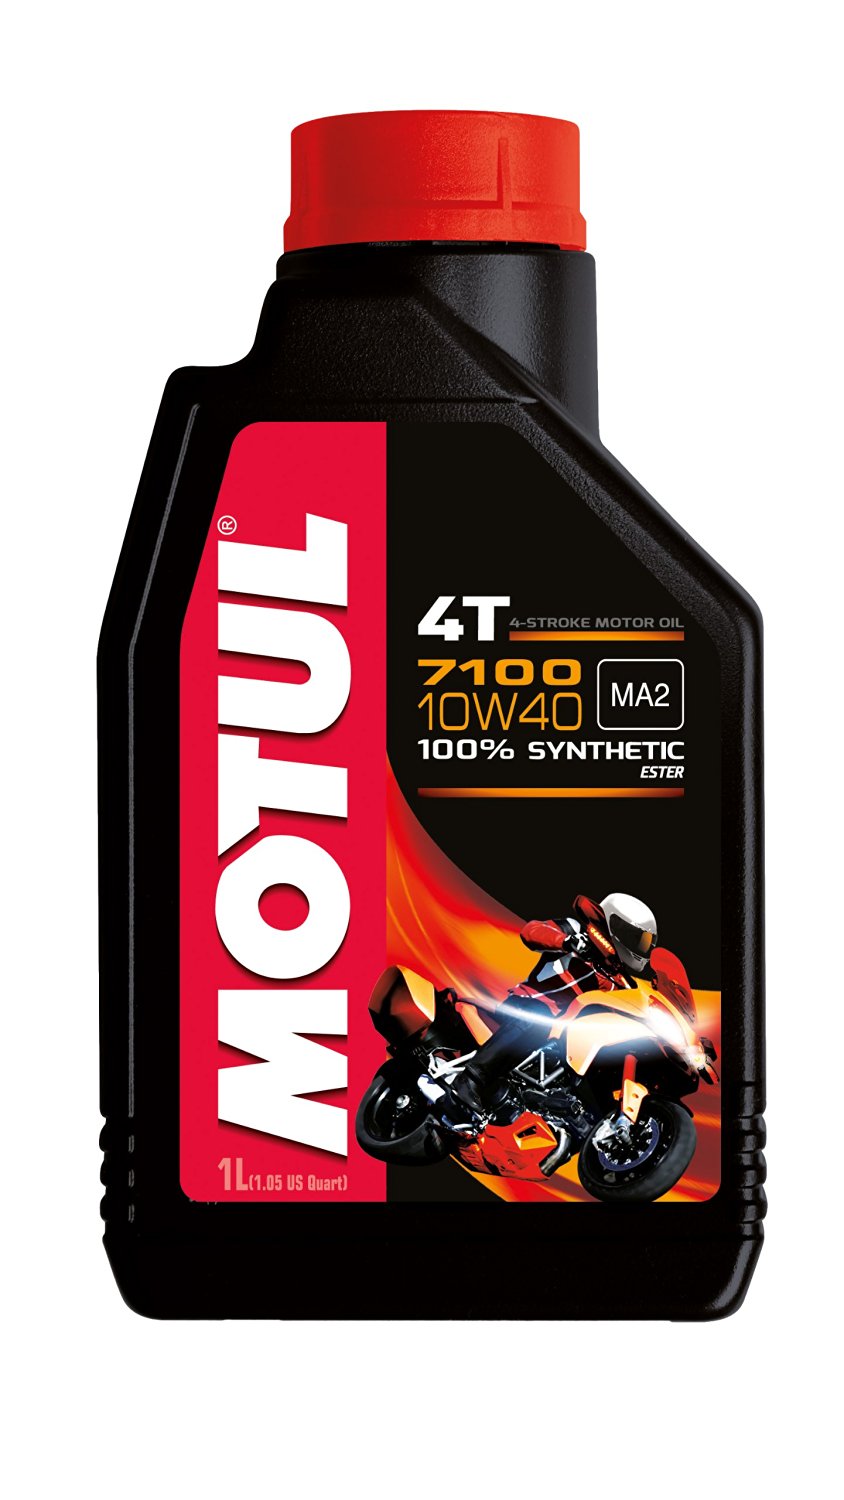 MOTUL 4T 7100 10W-40 FULL SYNTHETIC WITH ESTER: 1Ltr